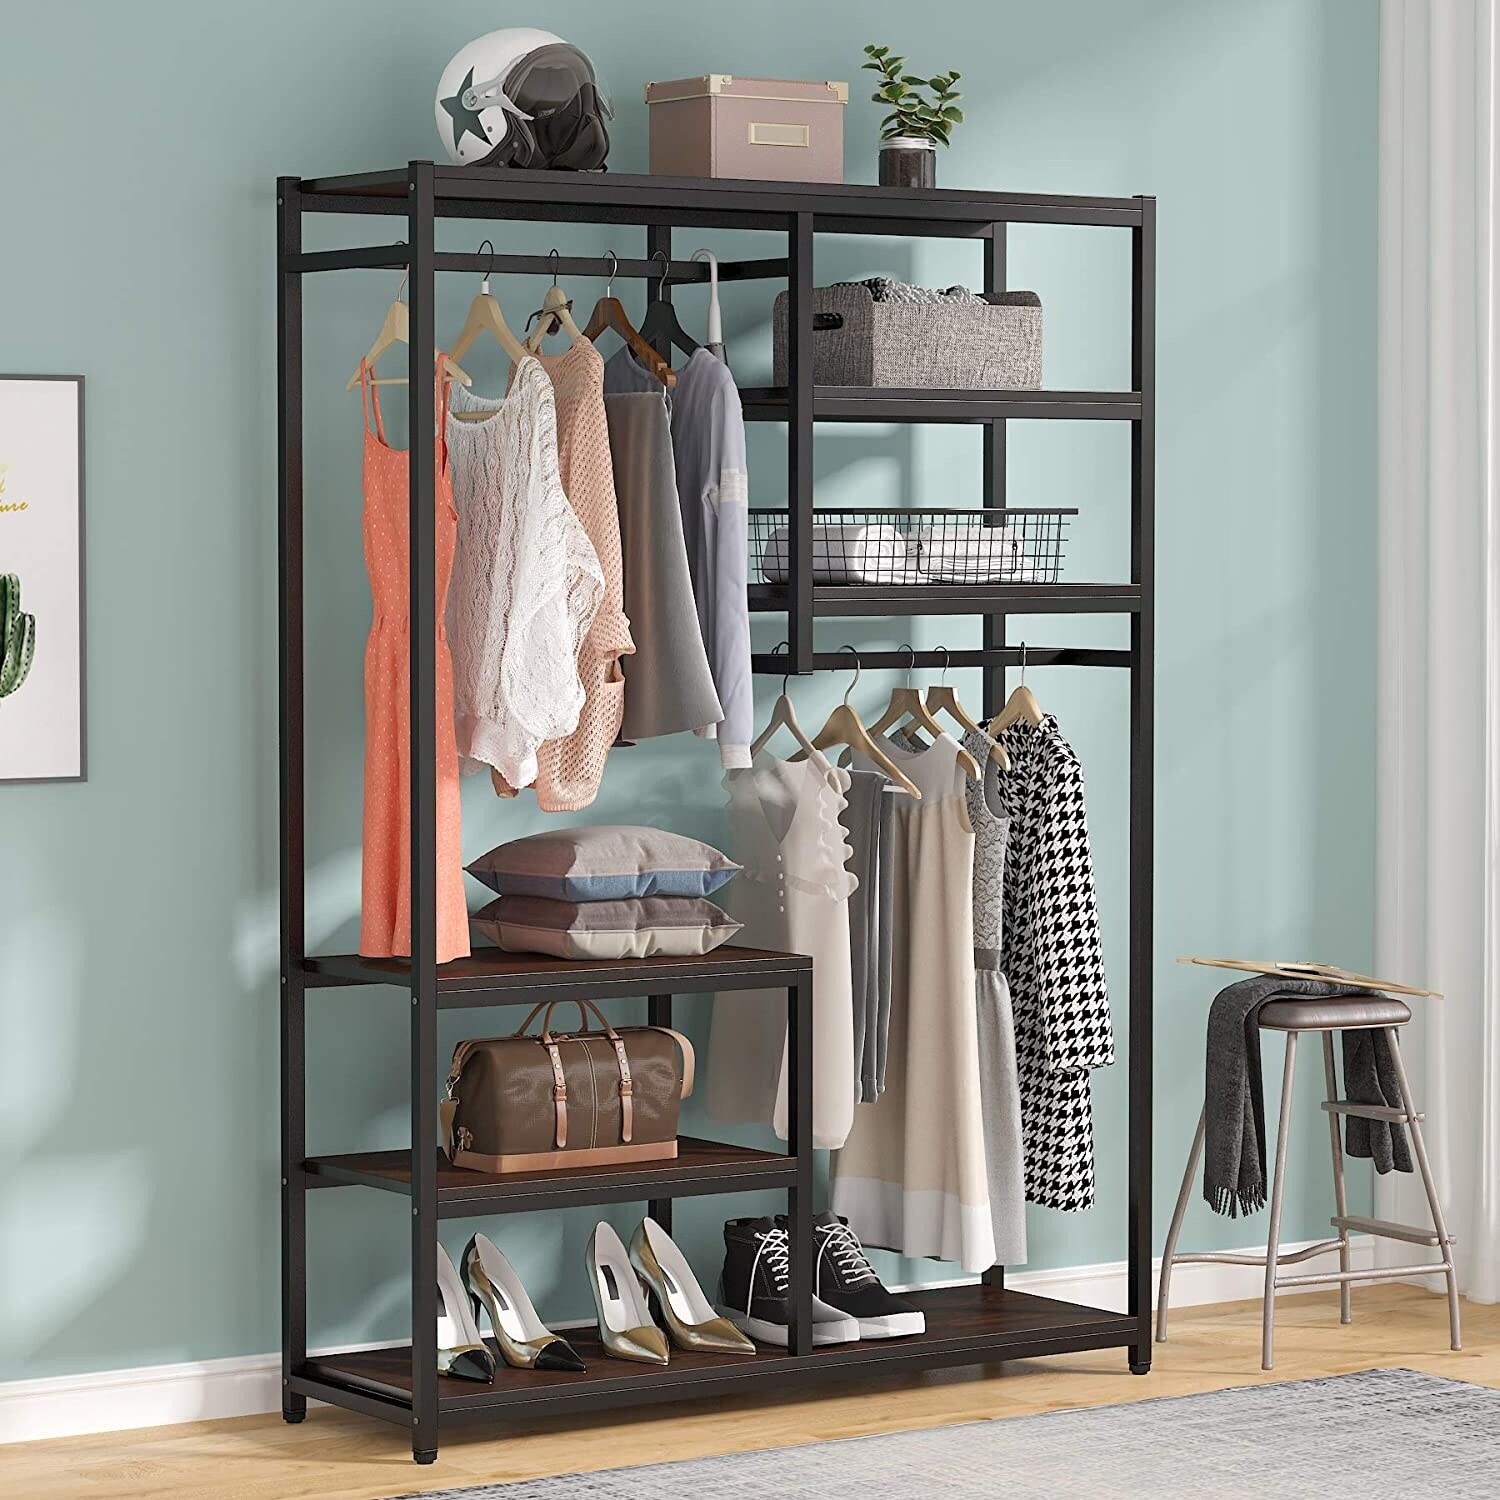 https://ak1.ostkcdn.com/images/products/is/images/direct/d8f1a8c985f2f295259a83ef3aa8637bcf6db8e1/Freestanding-Garment-Rack-with-Hanging-Rod-and-Storage-Shelf.jpg